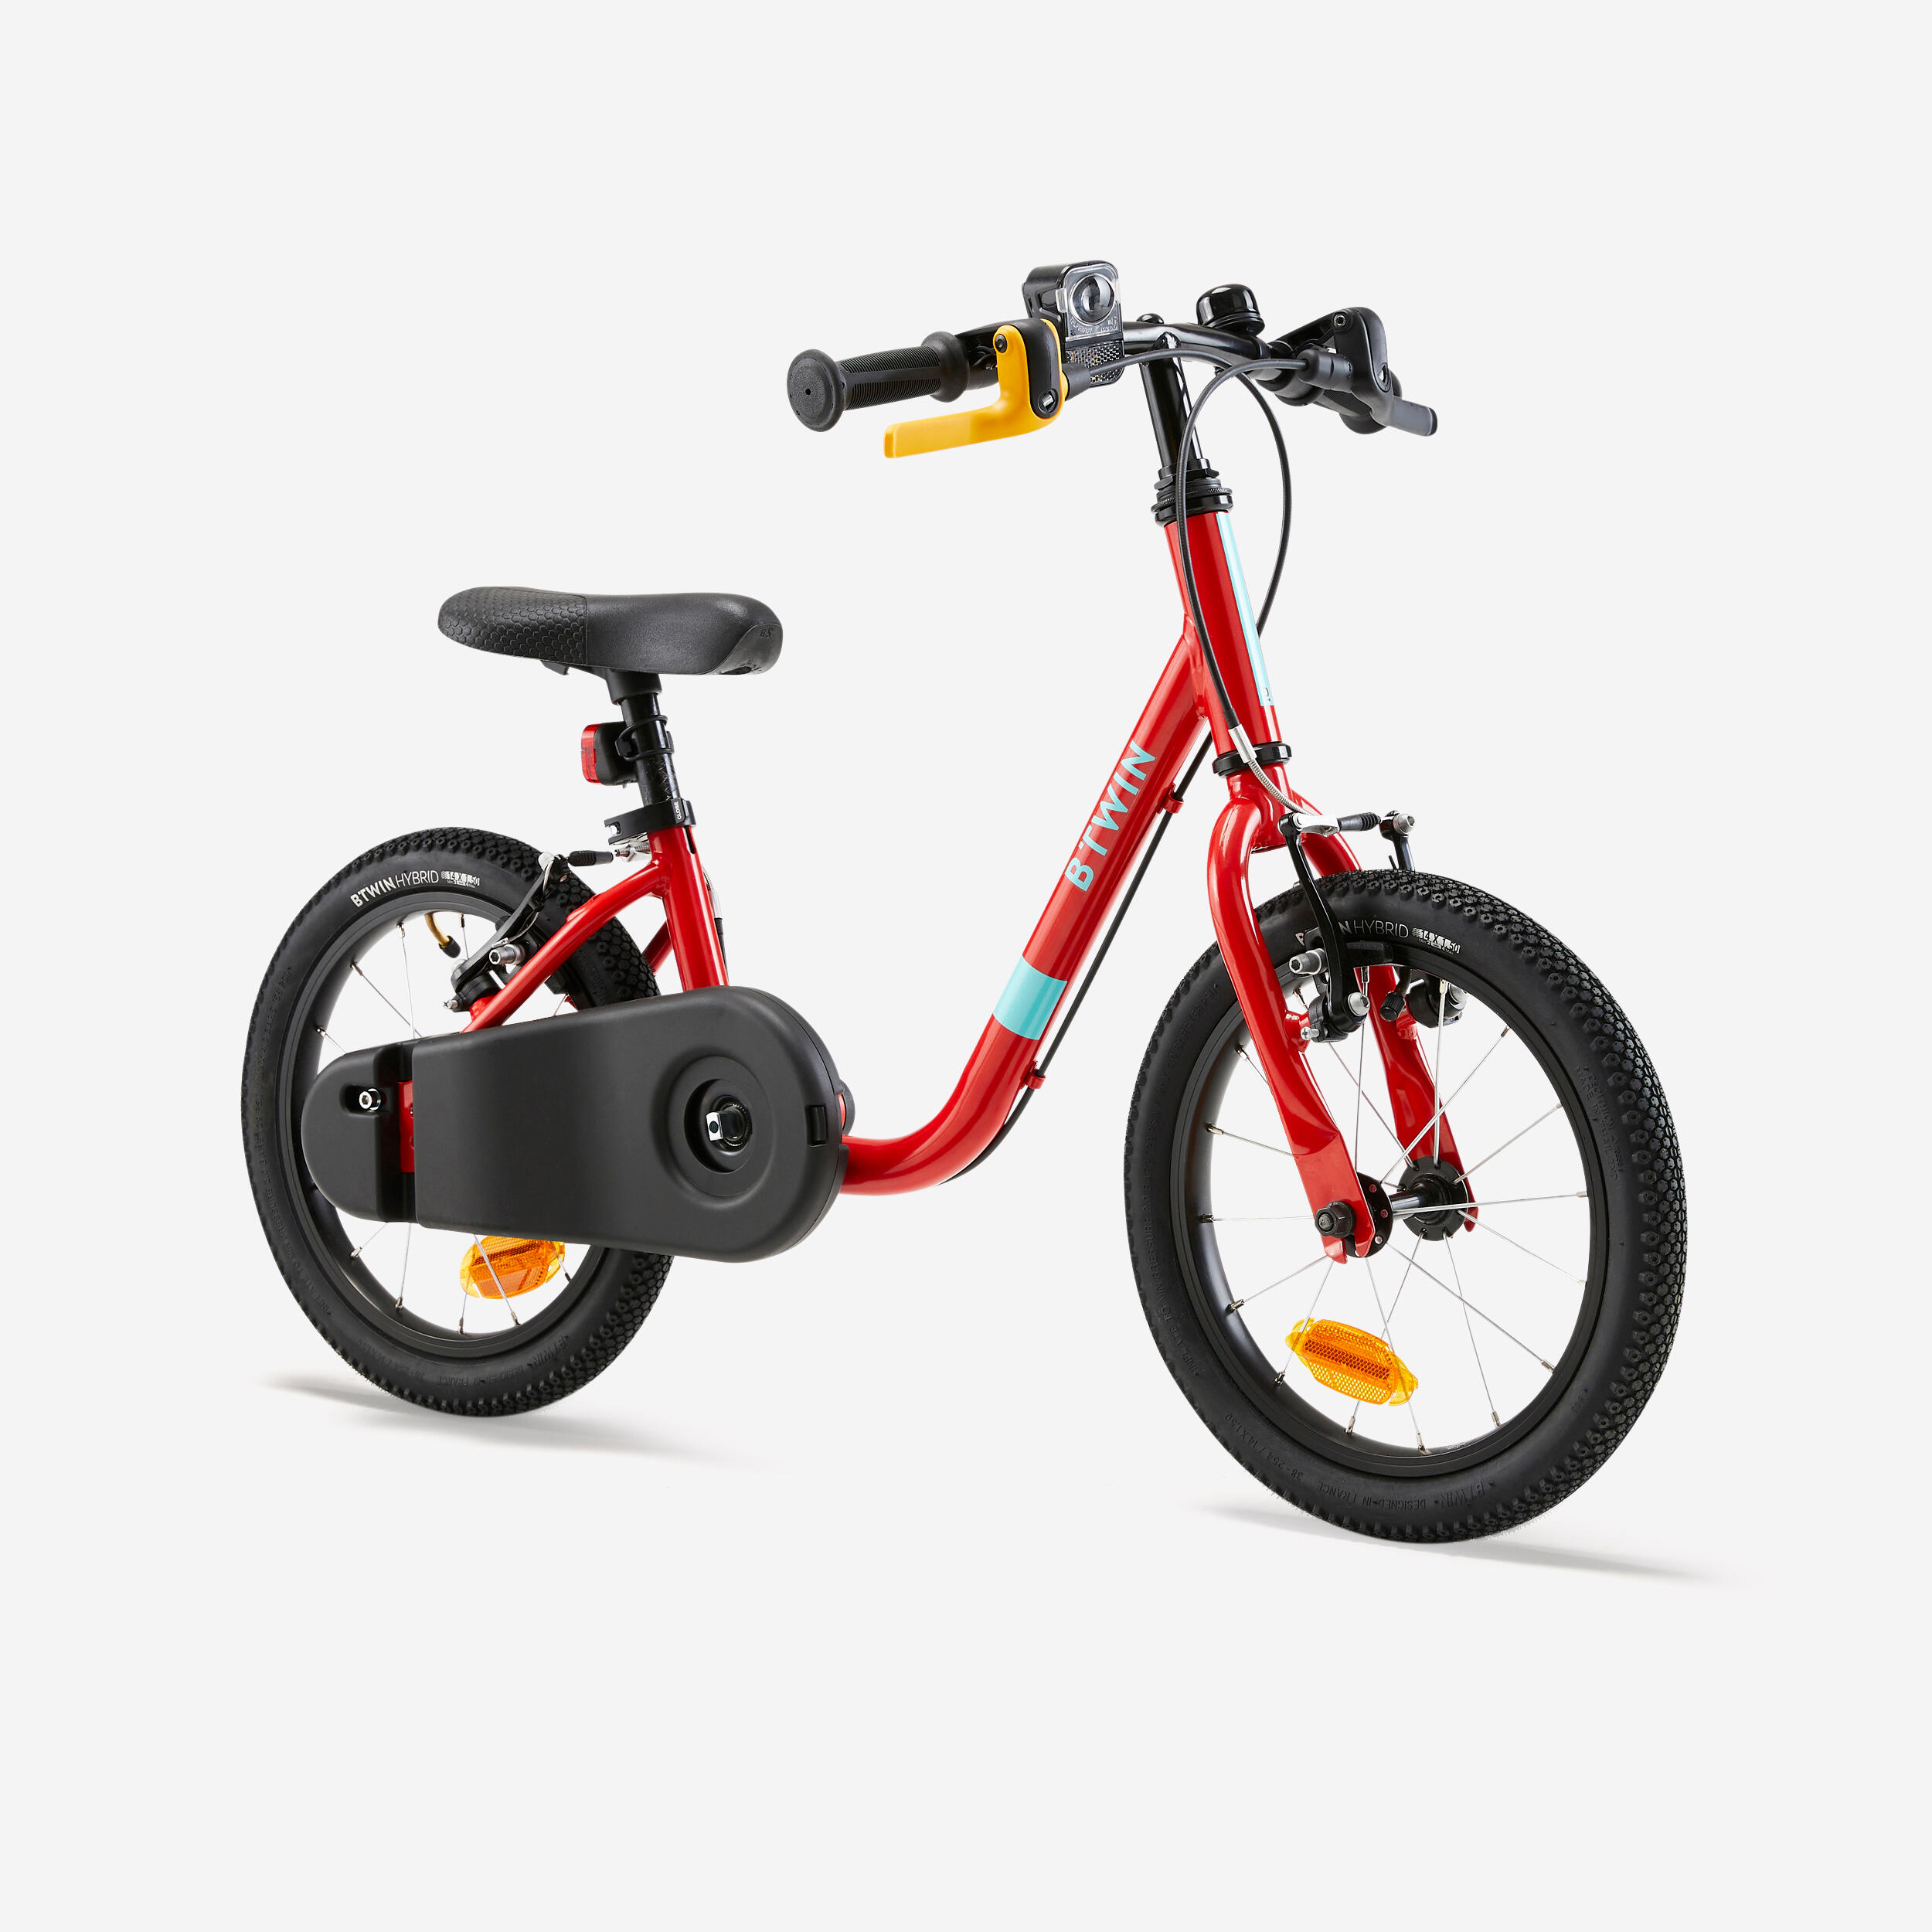 Kids' 14-Inch 3-5 Years 2-in-1 Balance Bike Discover 500 - Red 6/12